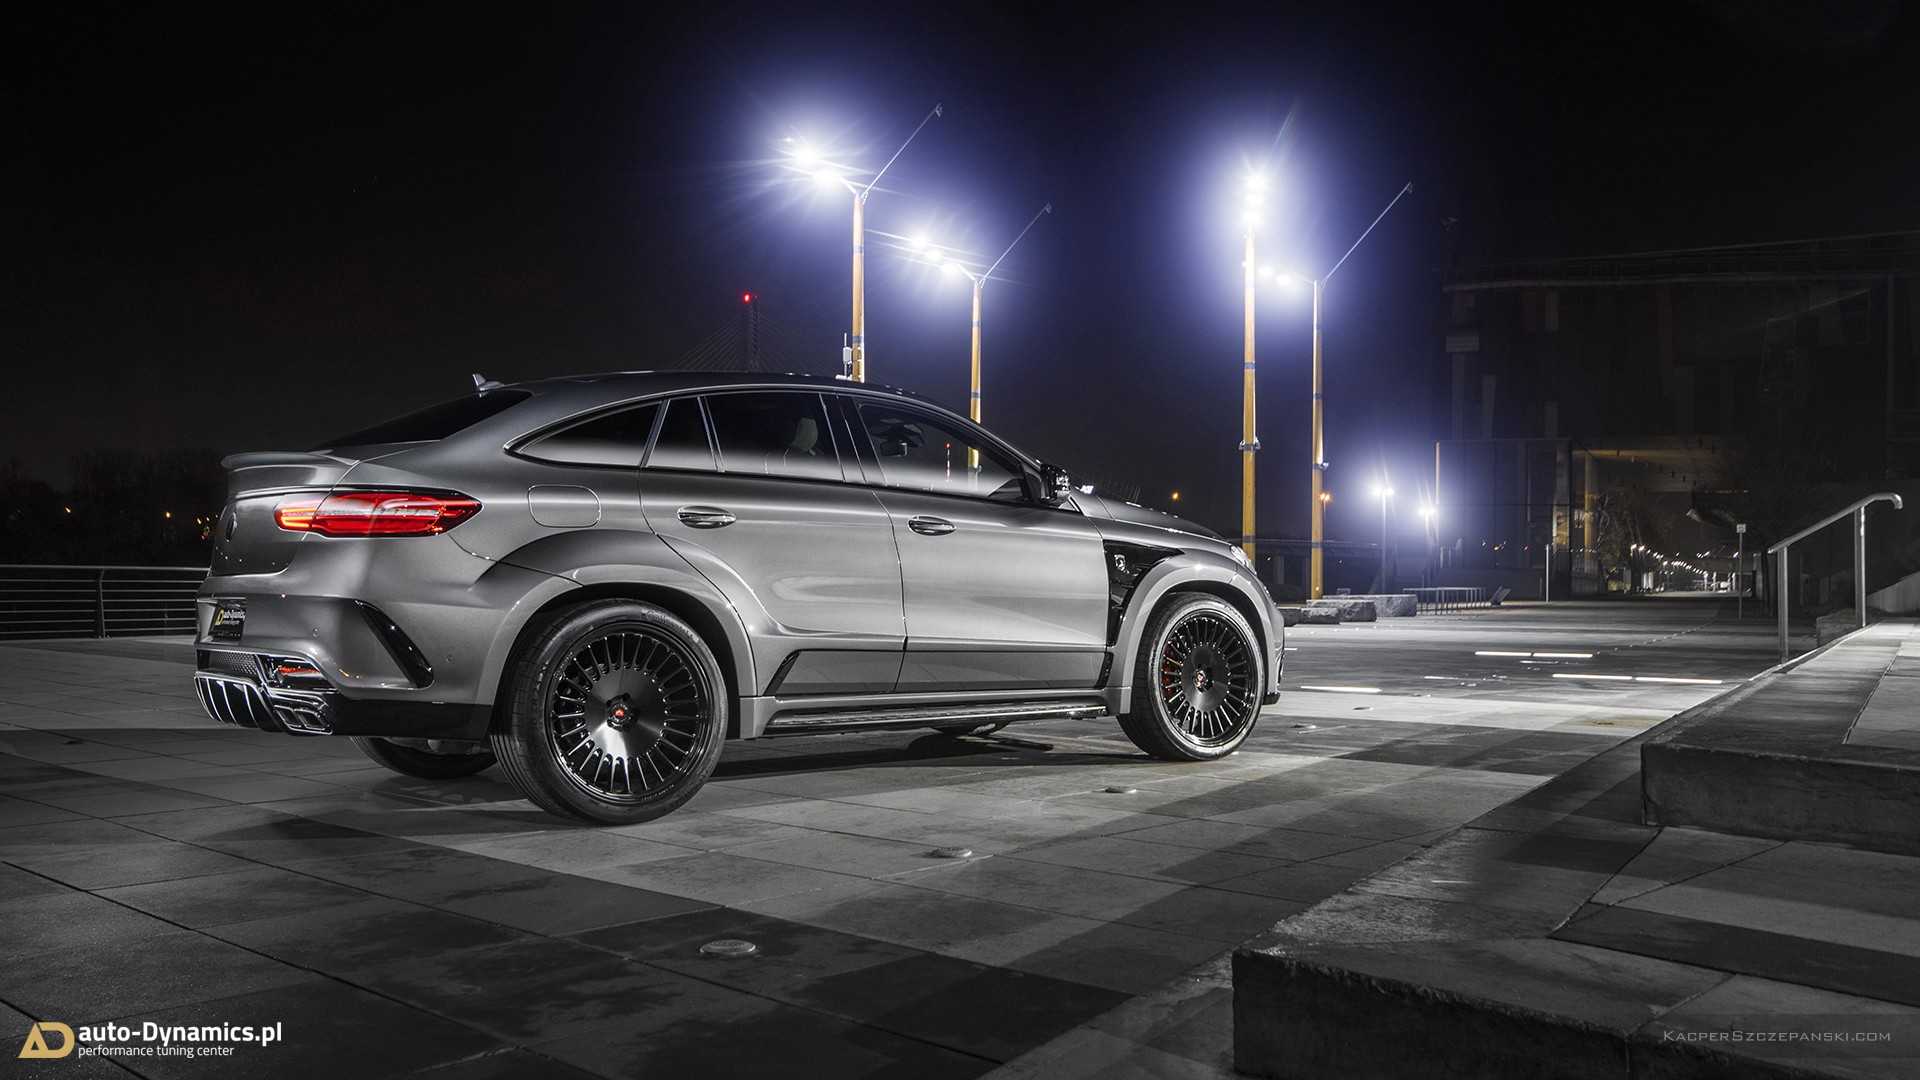 Mercedes-Benz GLE63 S AMG Inferno by auto-Dynamics.pl